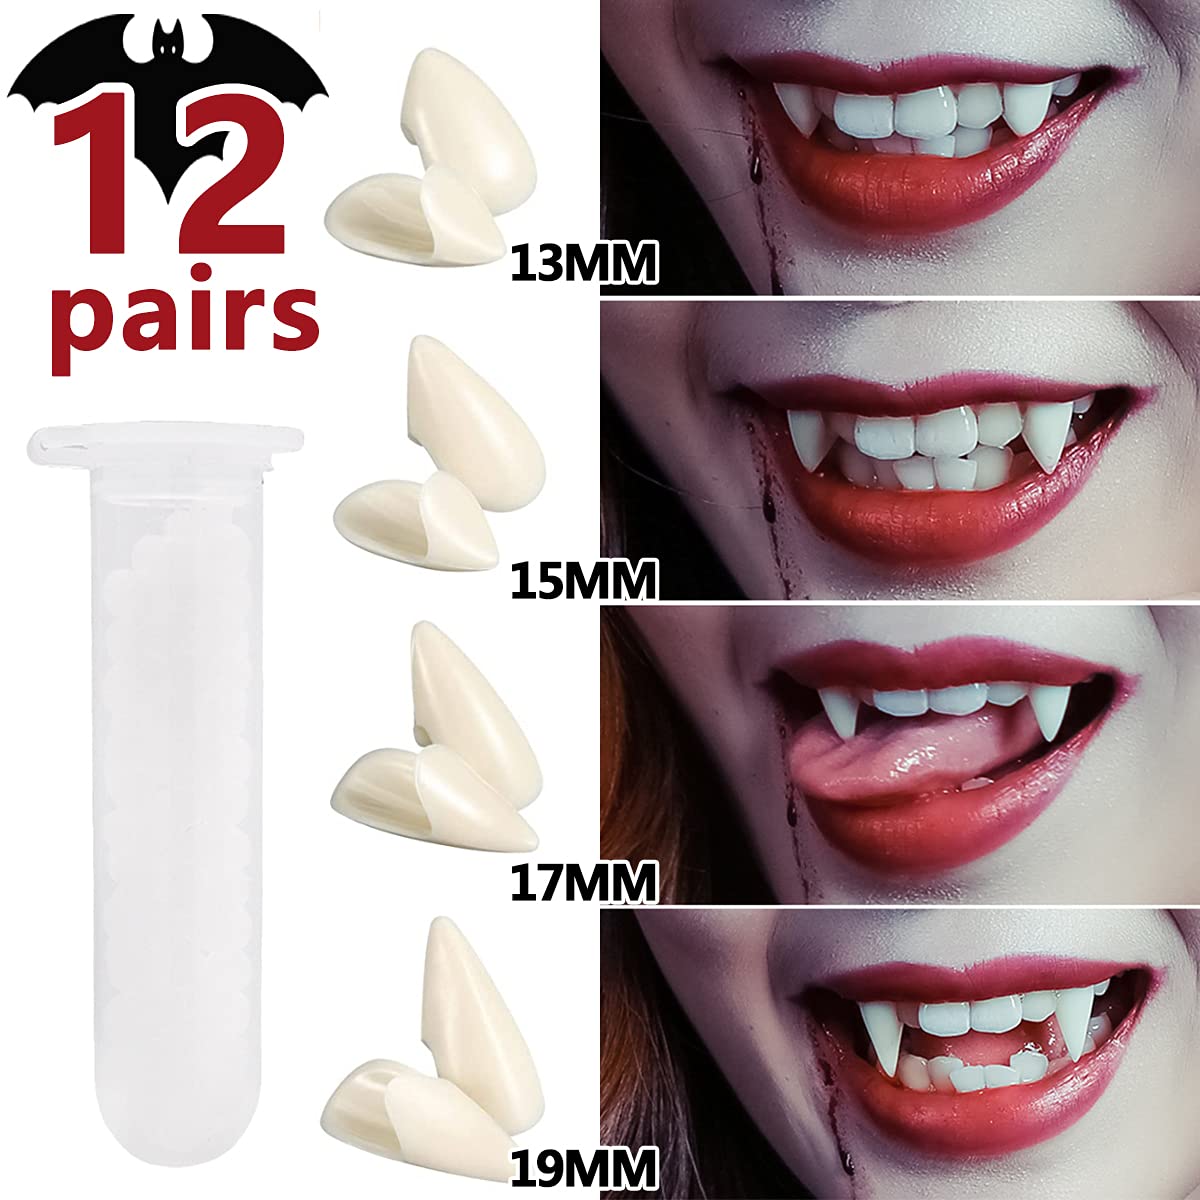 Nobie vivid 12 Pairs Vampire Teeth with Adhesive, Halloween Decorations Vampire Fangs, Halloween Party Cosplay Props,4 Size(13mm,15mm,17mm,19mm)